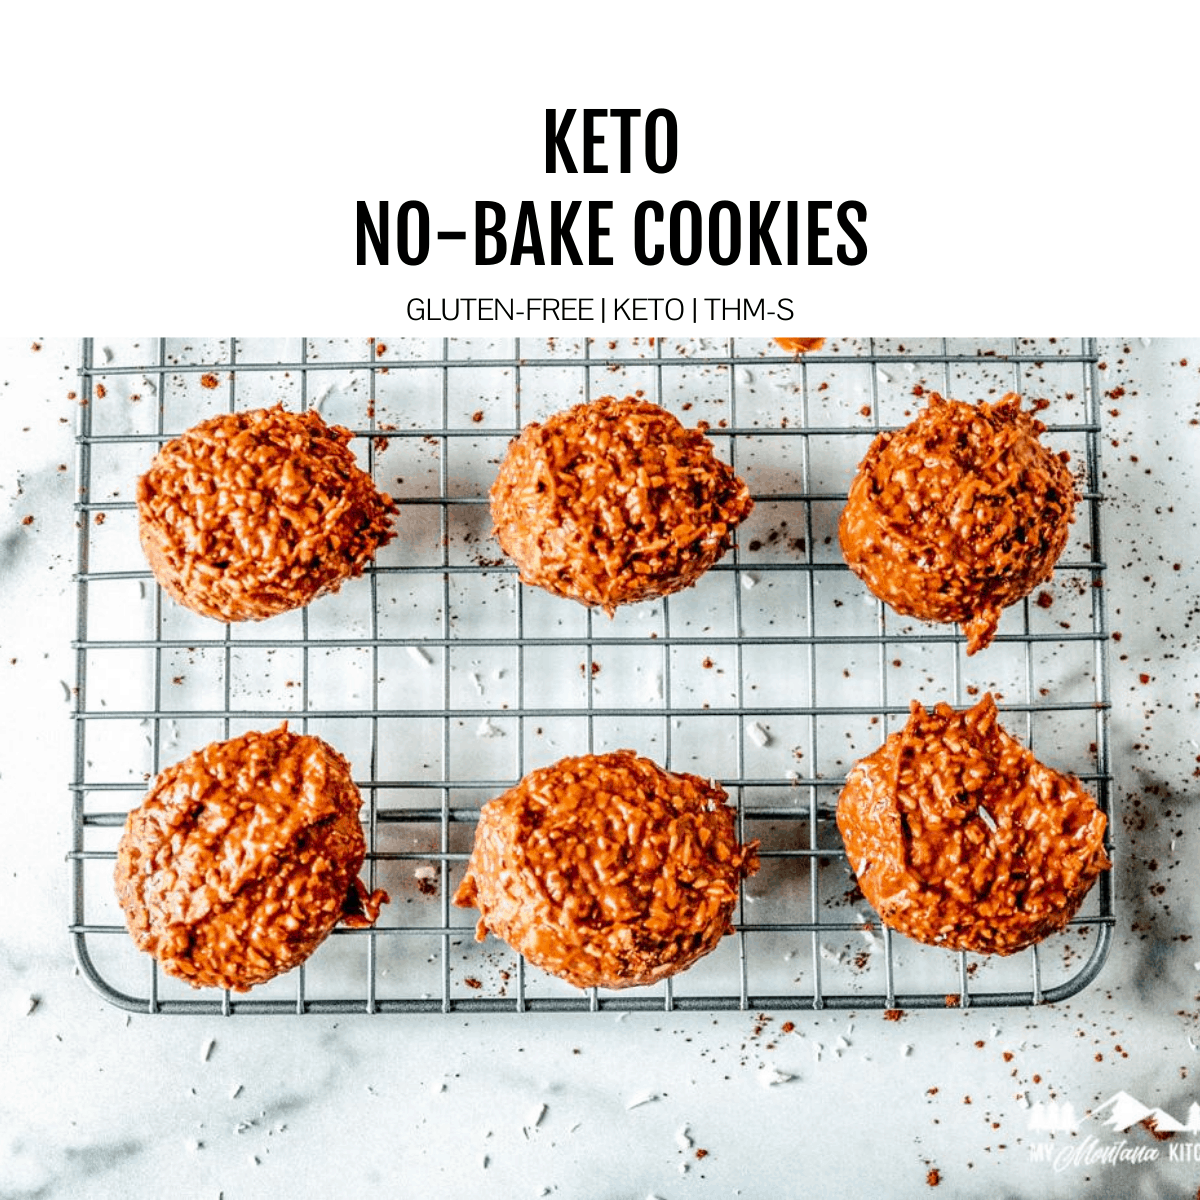 keto no bake cookies on rack featured image